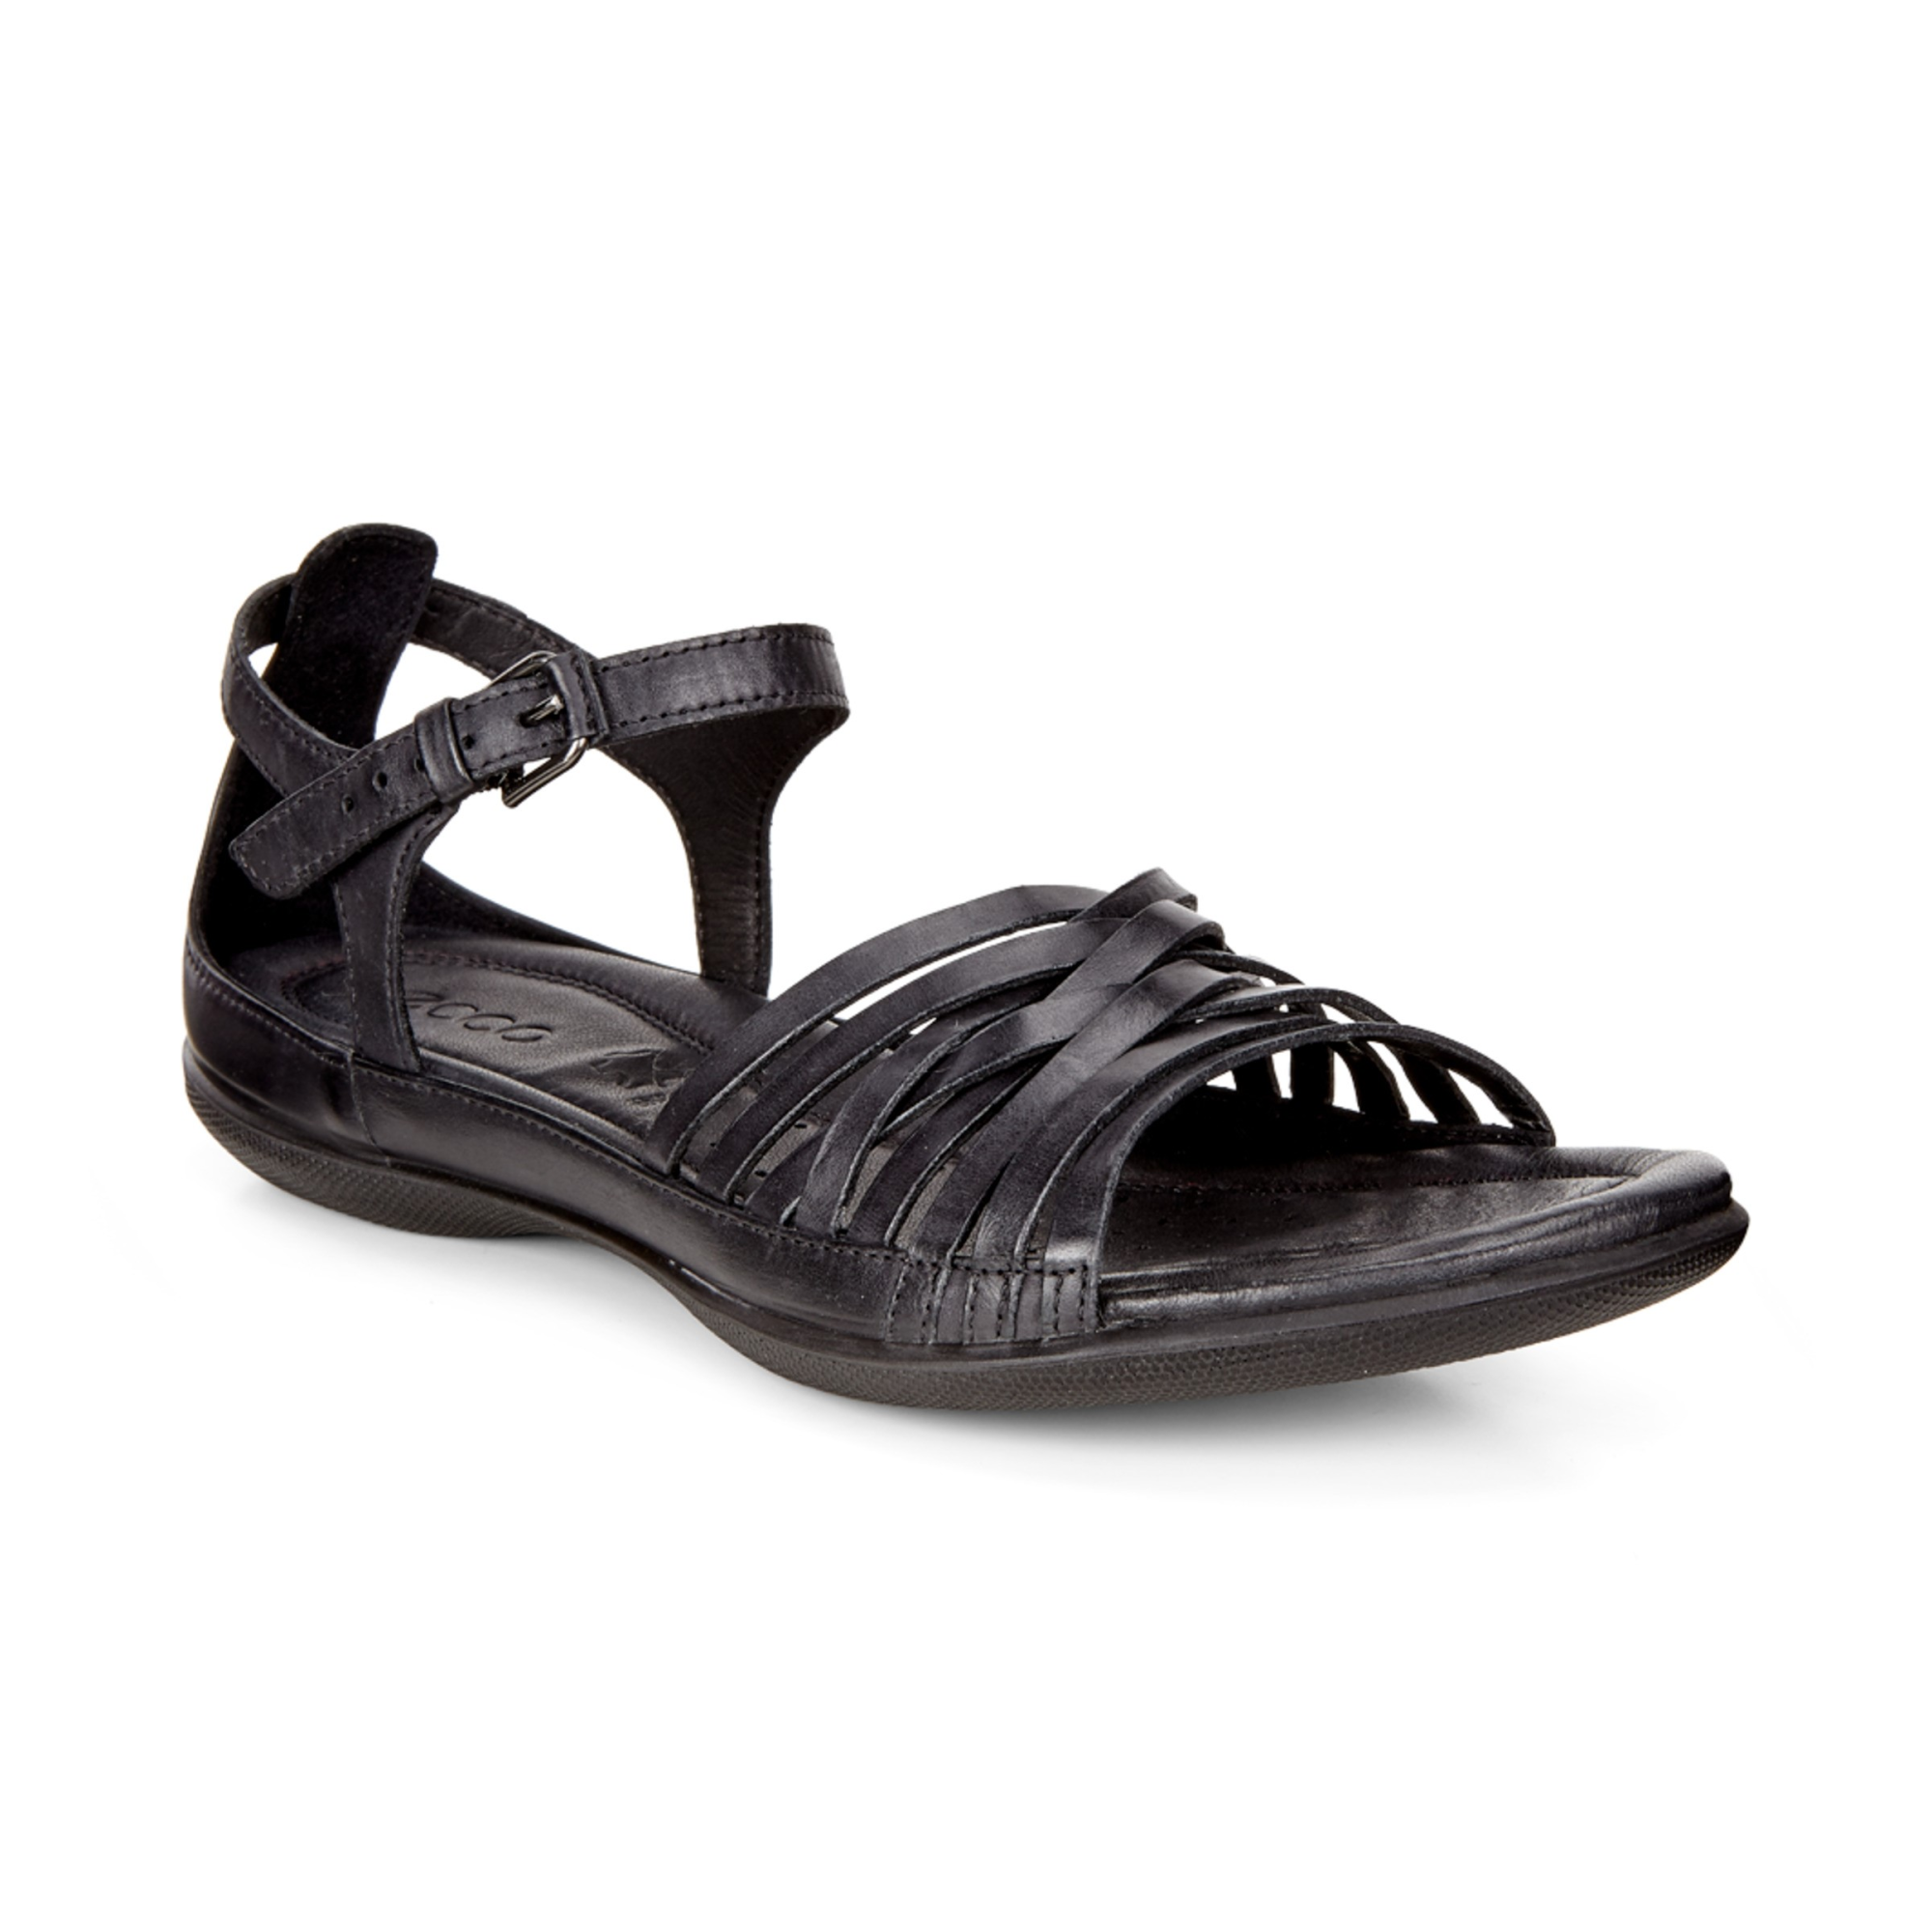 Ecco Flash Lattice Sandal 38 - Products - Veryk Mall - Veryk Mall, many product, quick safe your money!